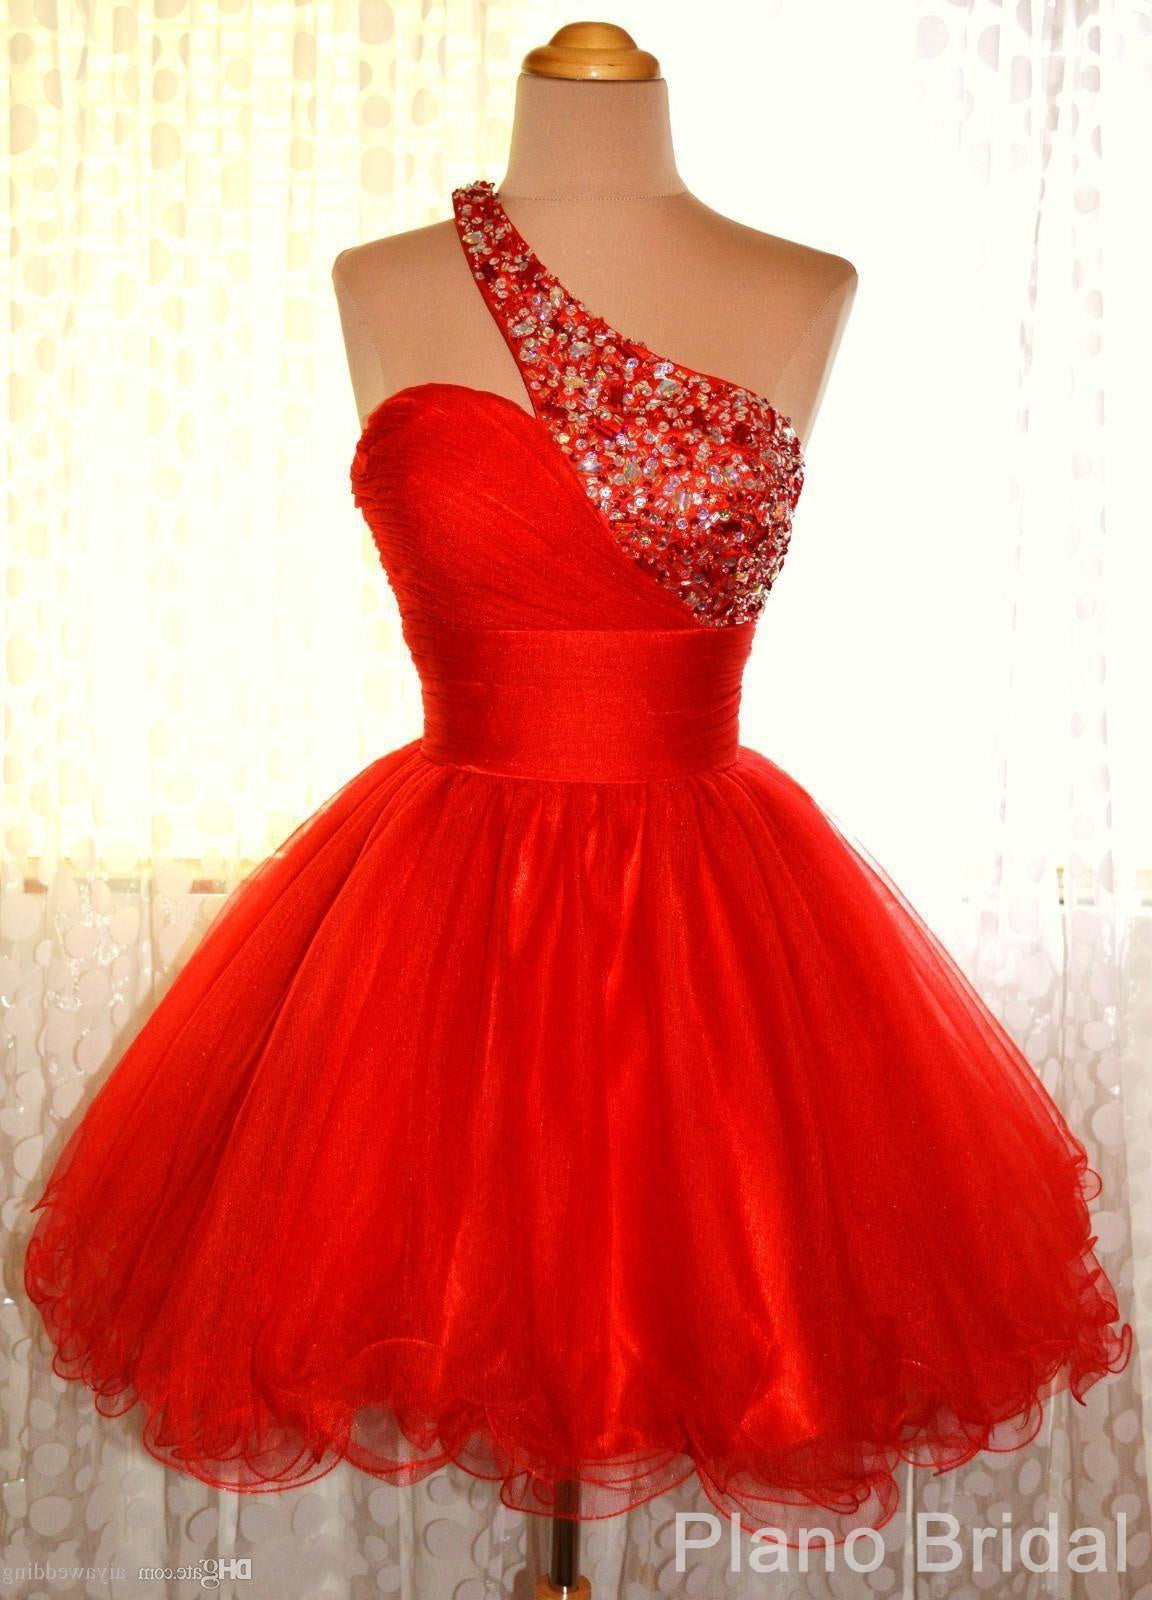 One Shoulder Red Sleeveless A Line Organza Pleated Rhinestone Corset Homecoming Dresses outfit, Prom Dress For Kids